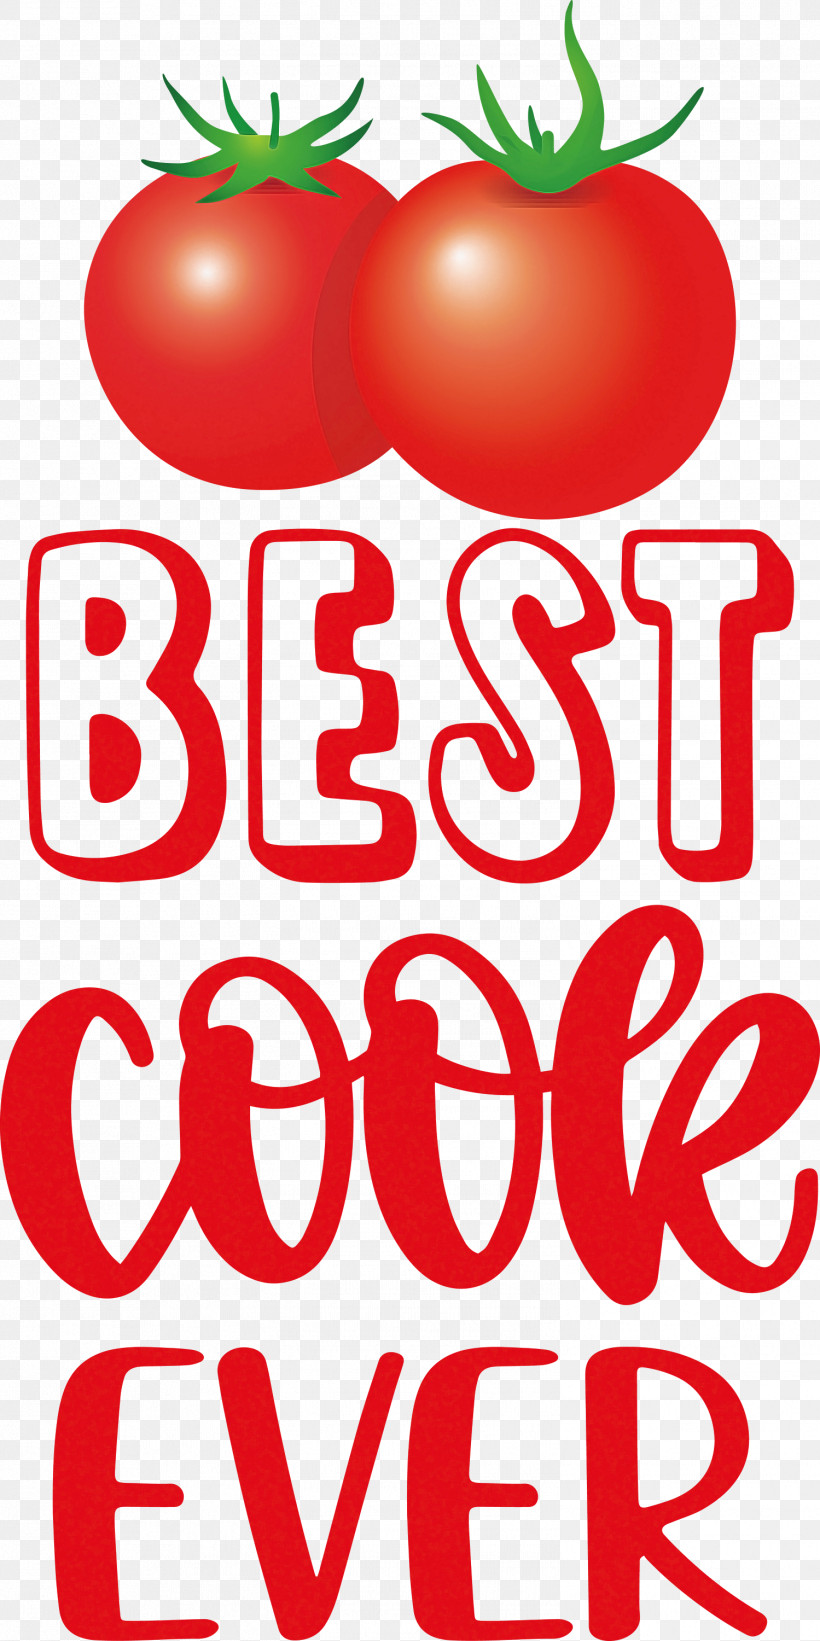 Best Cook Ever Food Kitchen, PNG, 1499x3000px, Food, Chef, Cook, Cooking, Fast Food Download Free